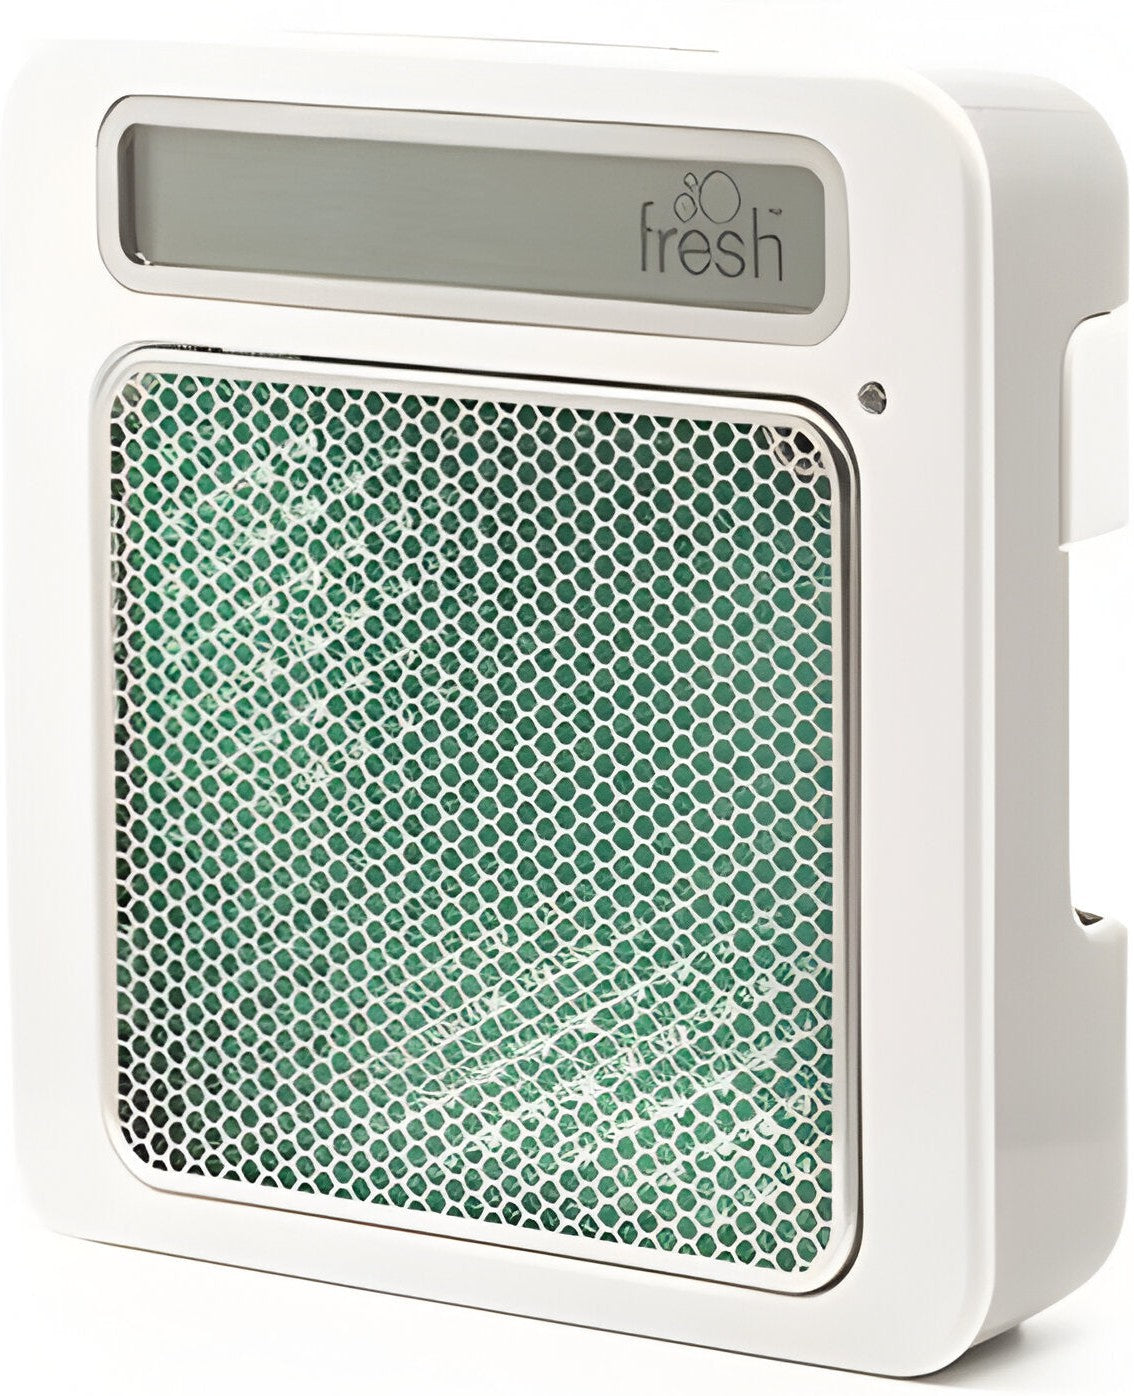 Fresh Products - OurFresh Air Freshener Dispenser, 12/Case - FROFCABF000I0M12